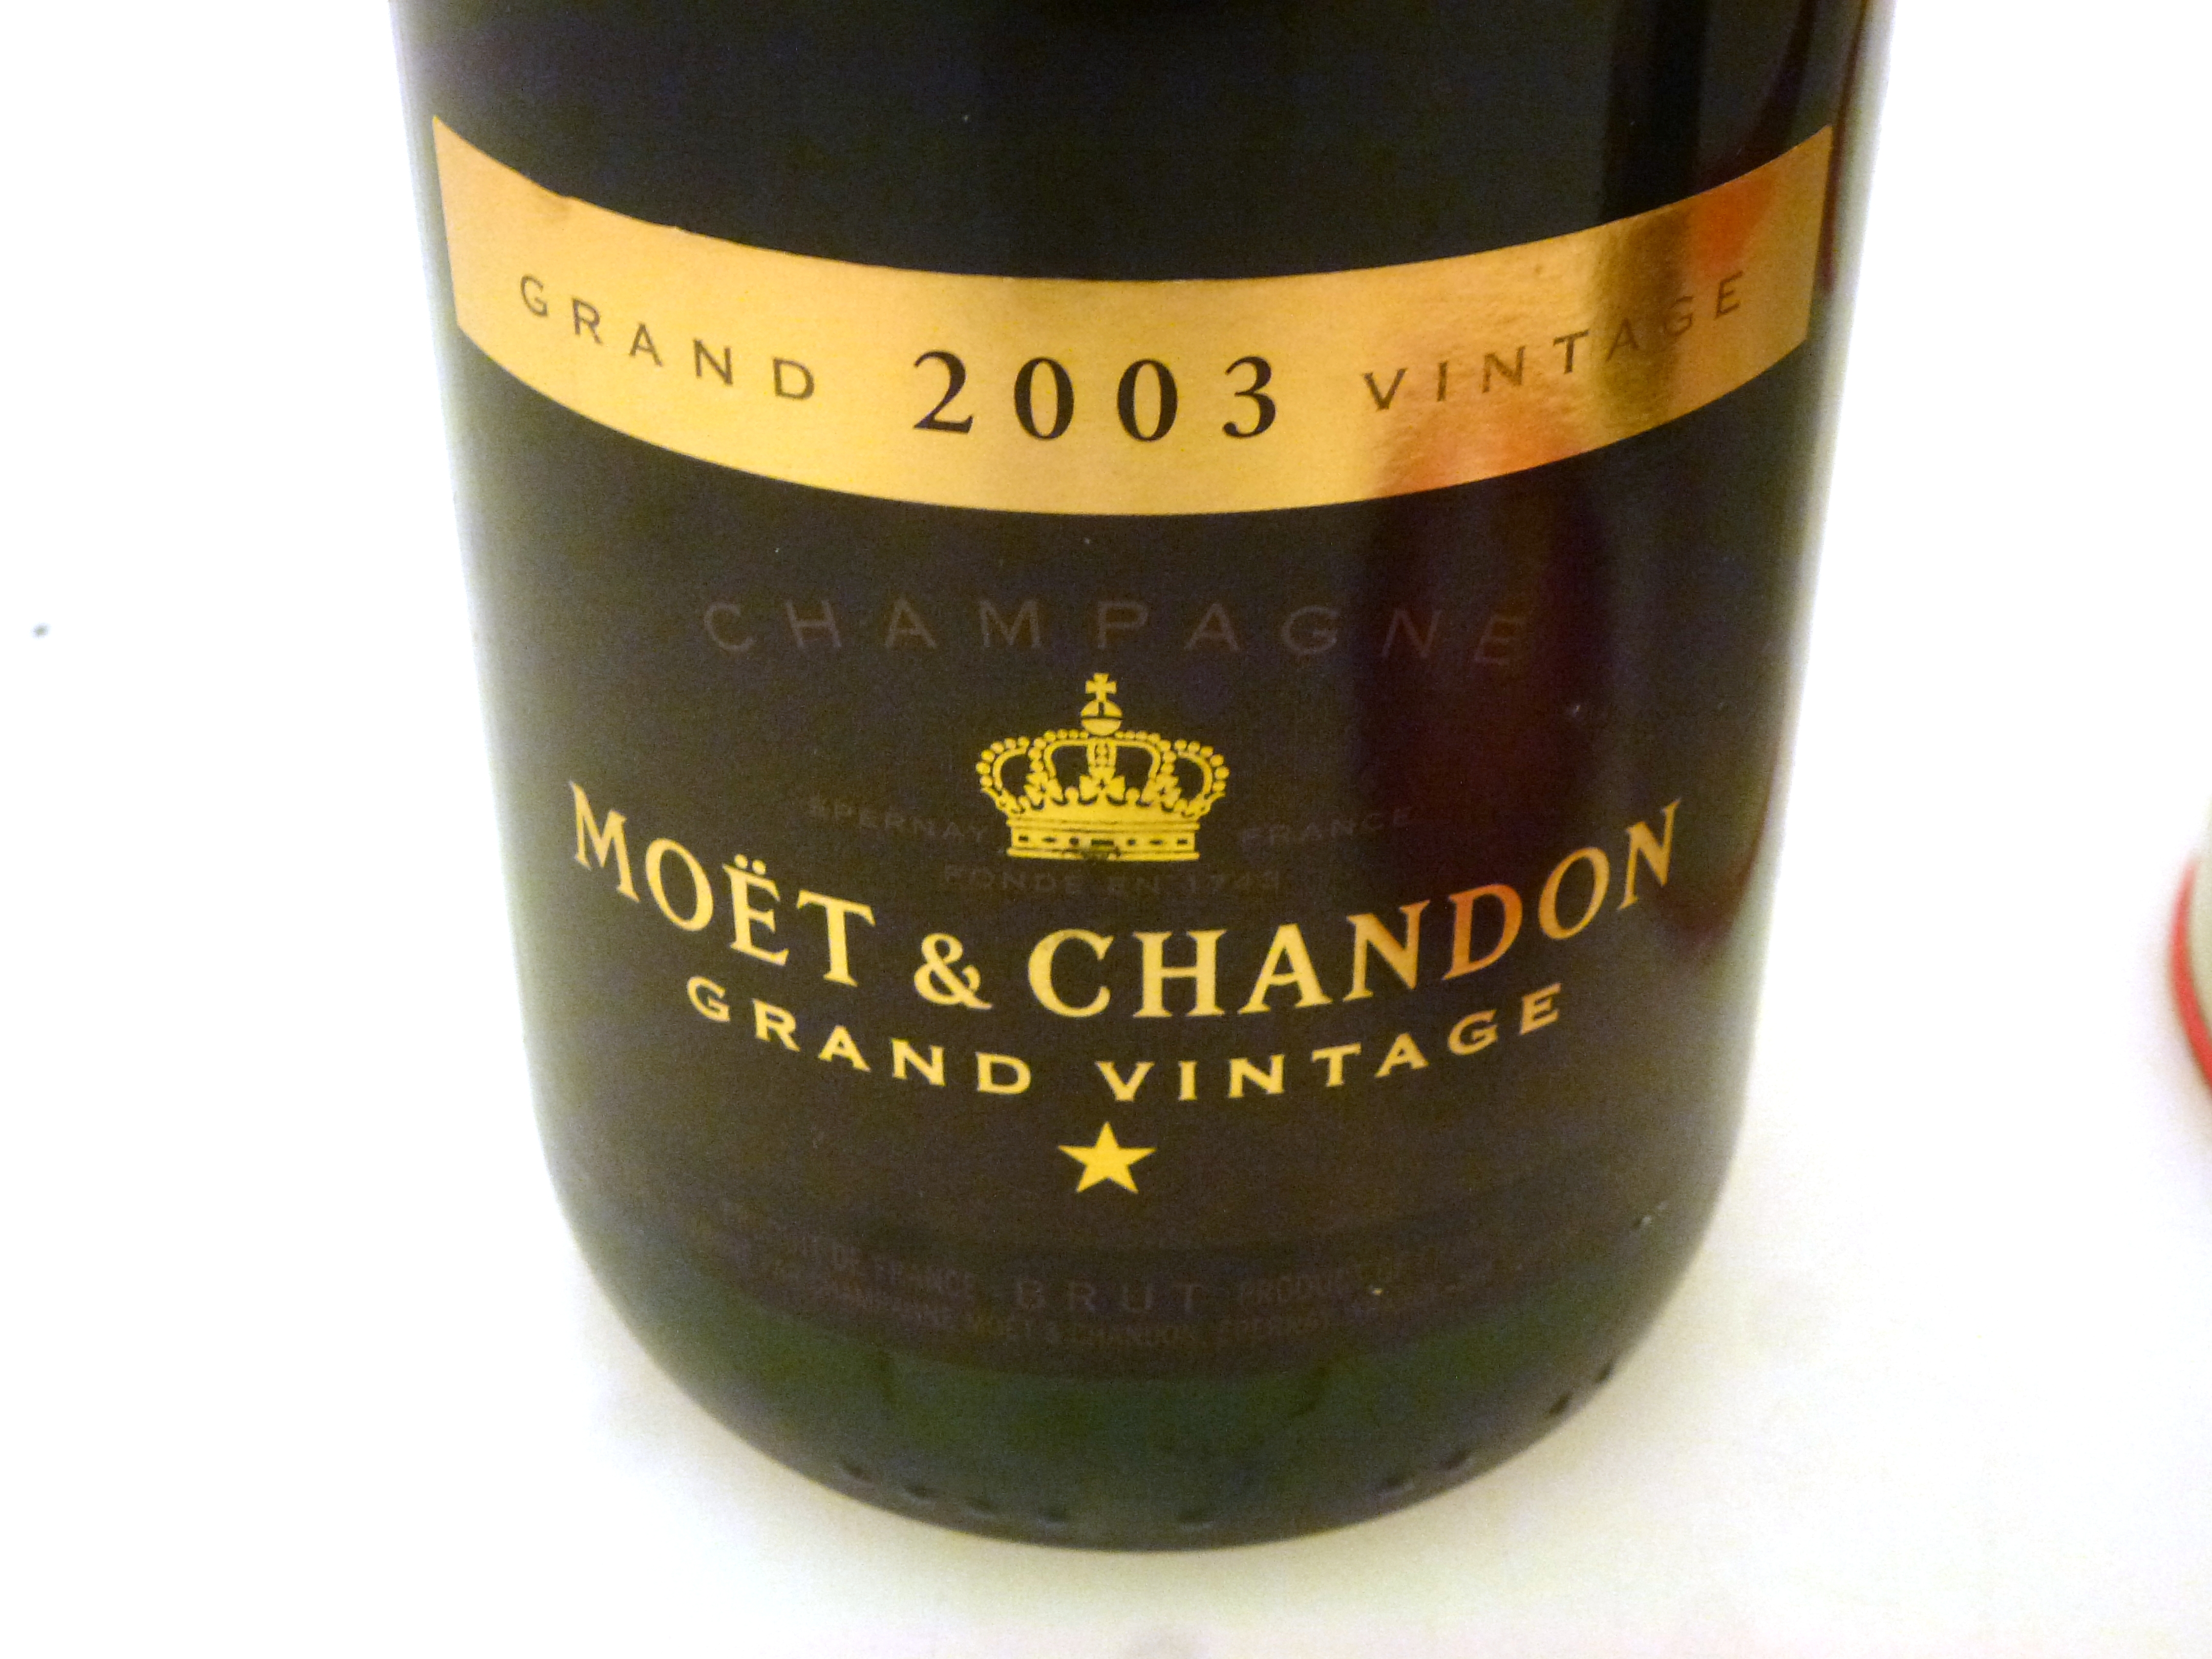 BOTTLE OF 2003 MOET AND CHANDON GRAND VINTAGE CHAMPAGNE AND A BOXED BOTTLE OF G.H. MUMM AND CIE - Image 4 of 7